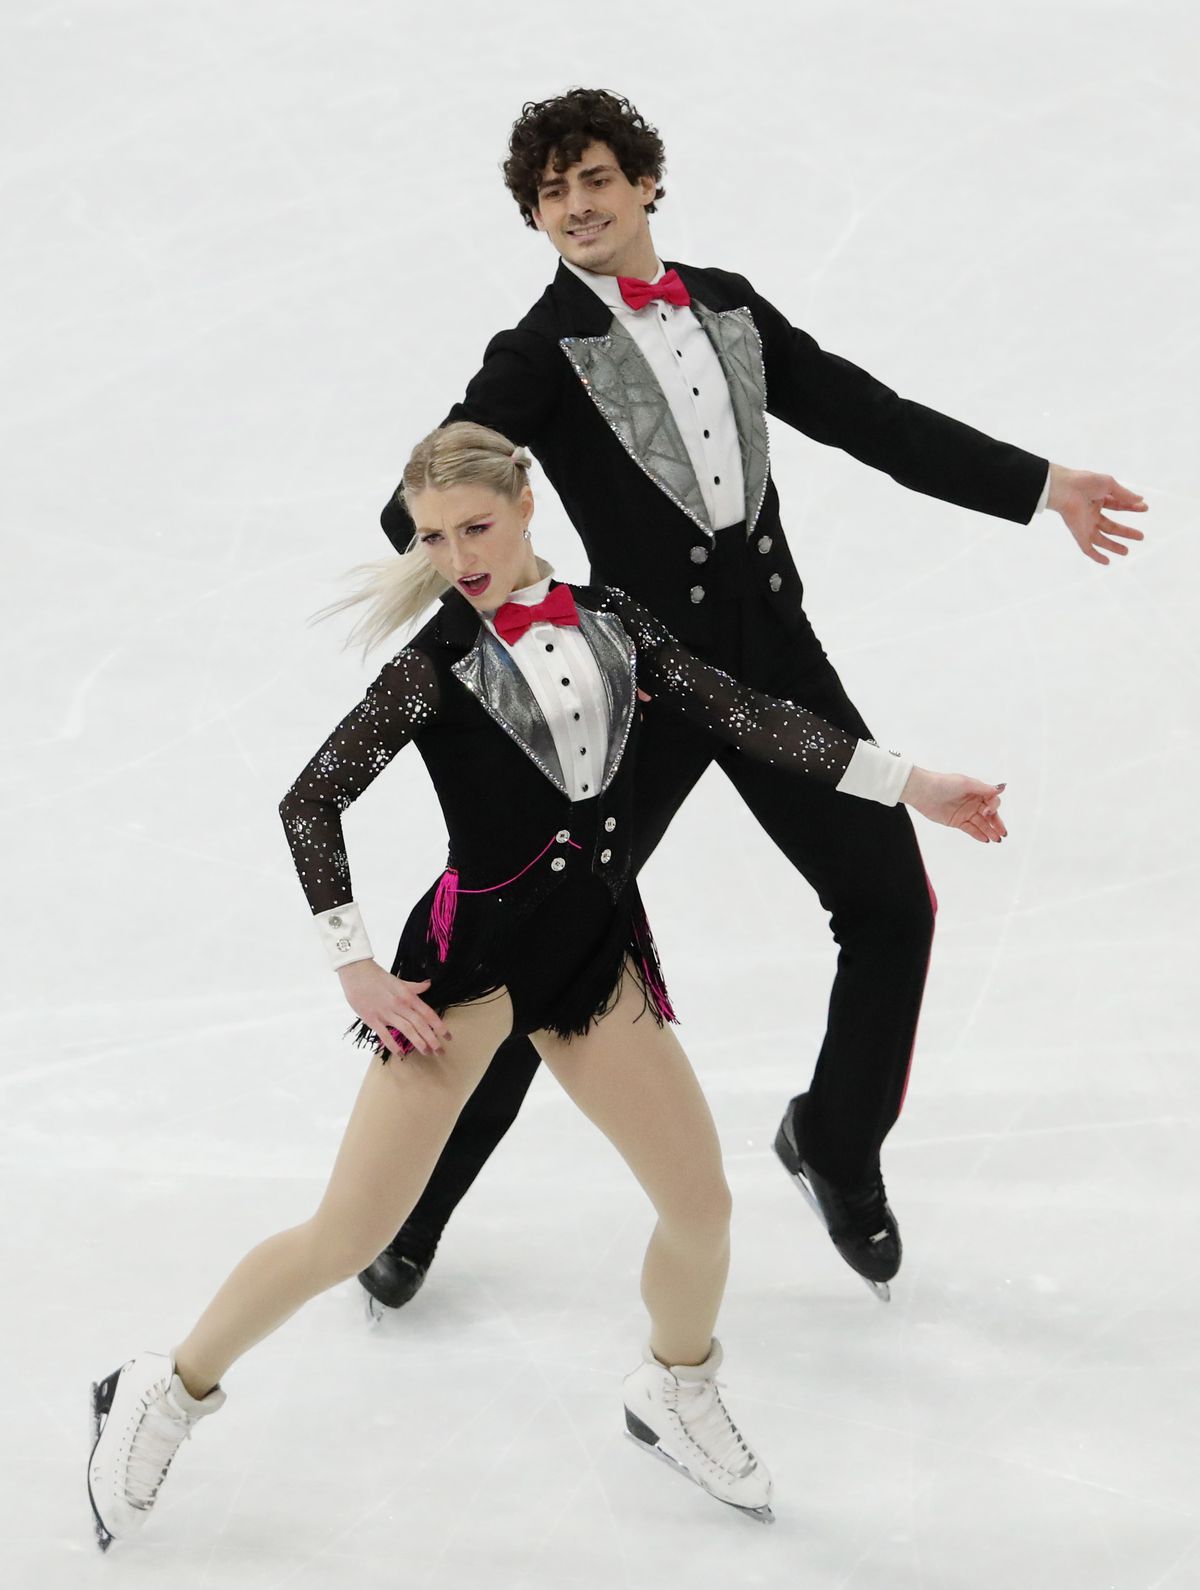 Paul Poirier and Piper Gilles of Canada at an event in Sweden in March.